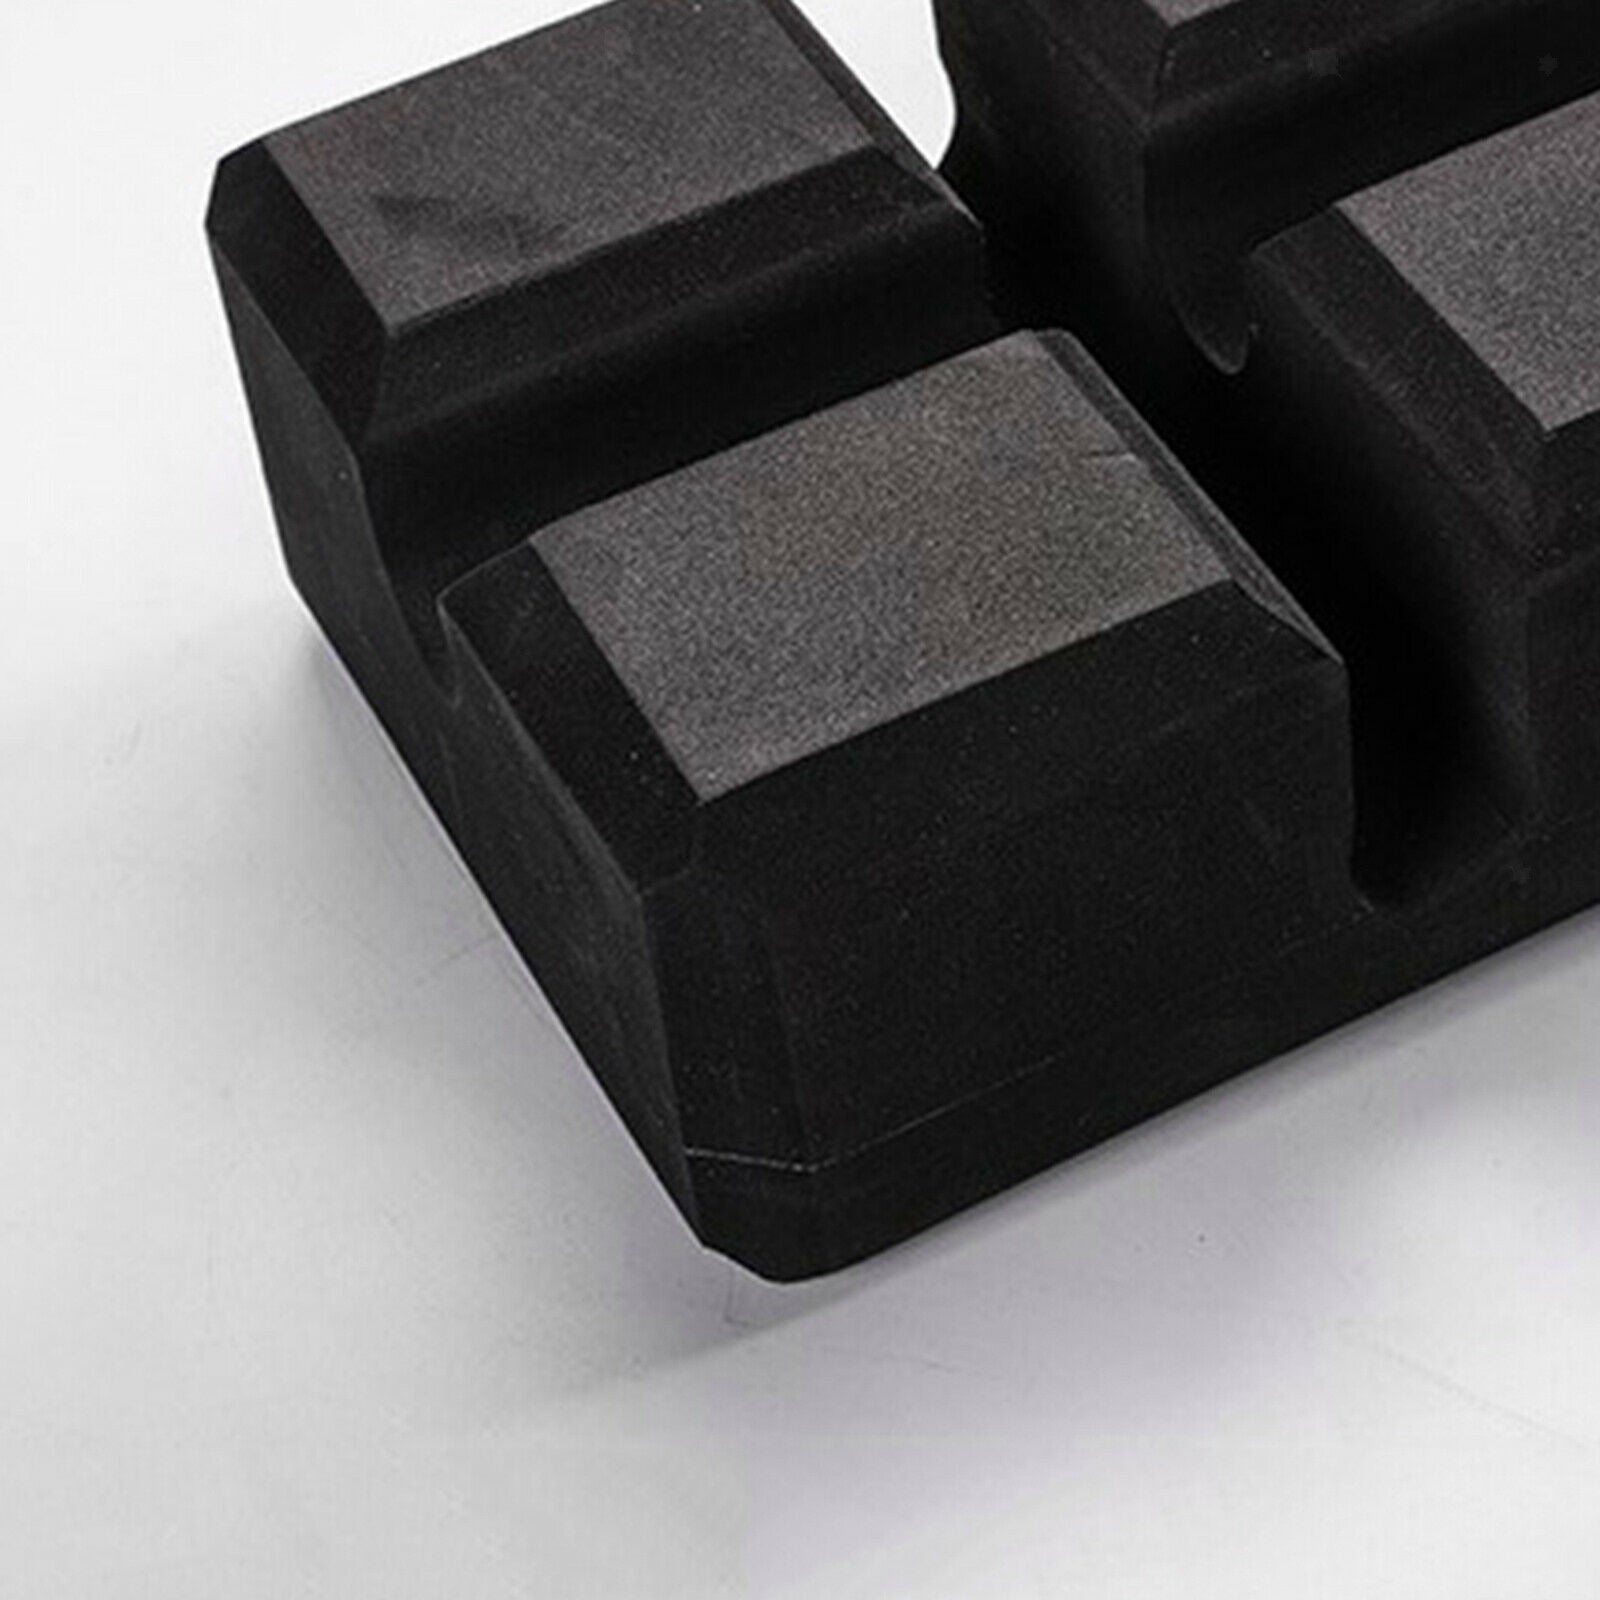 Bench Press Block Home Olympic Bar Foam Pad Forearm Toning Trainer Aids